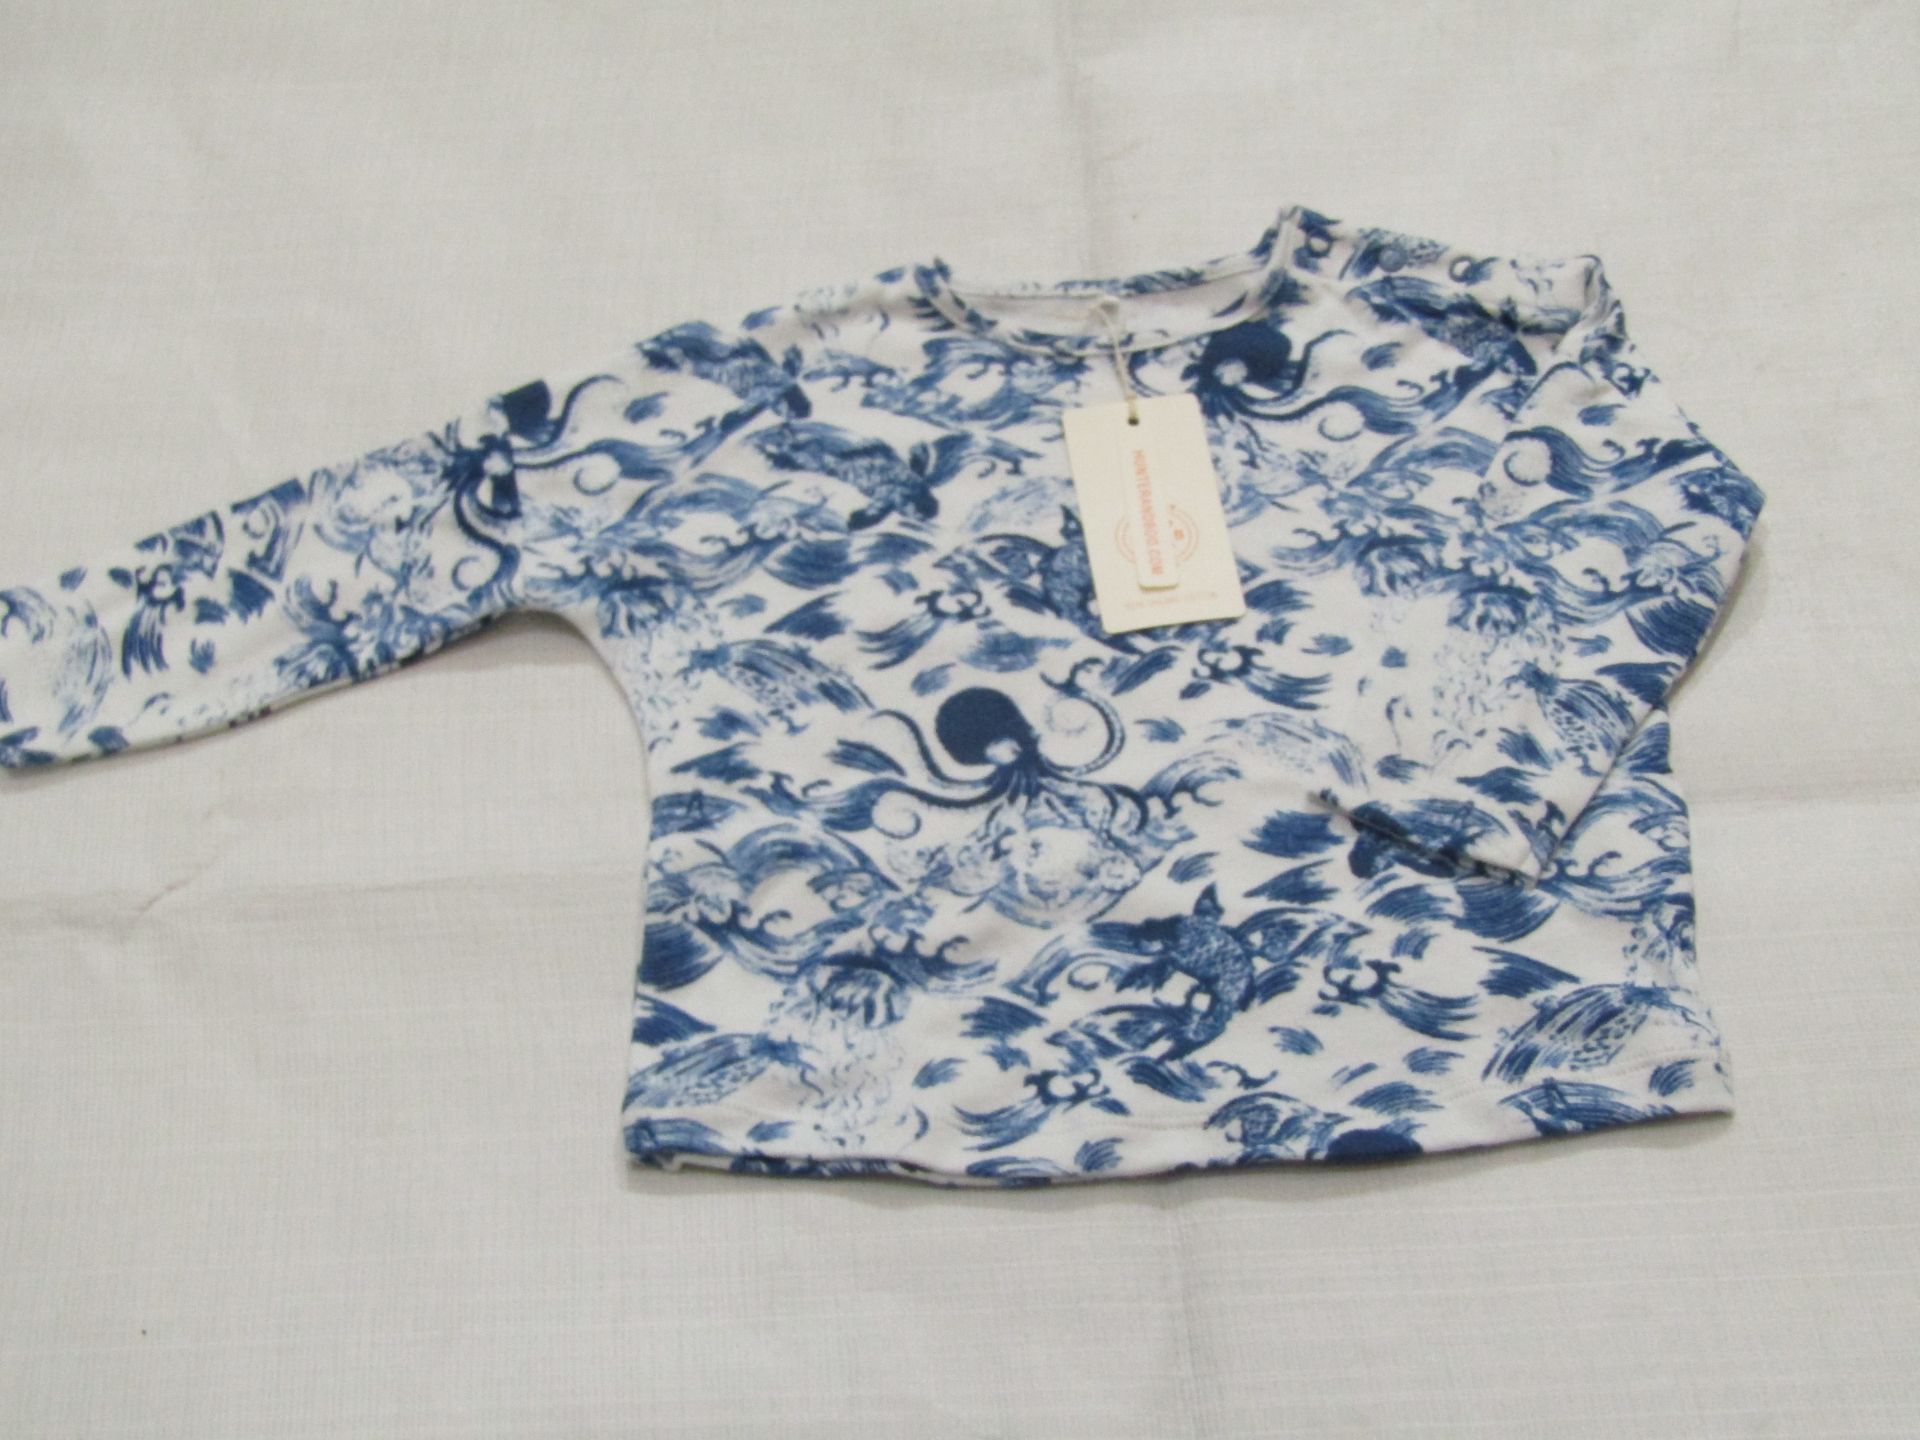 2 X Hunter & Boo Kayio Print Long Sleeve Tops Blue/White Aged 18-24 Months New & Packaged RRP œ13